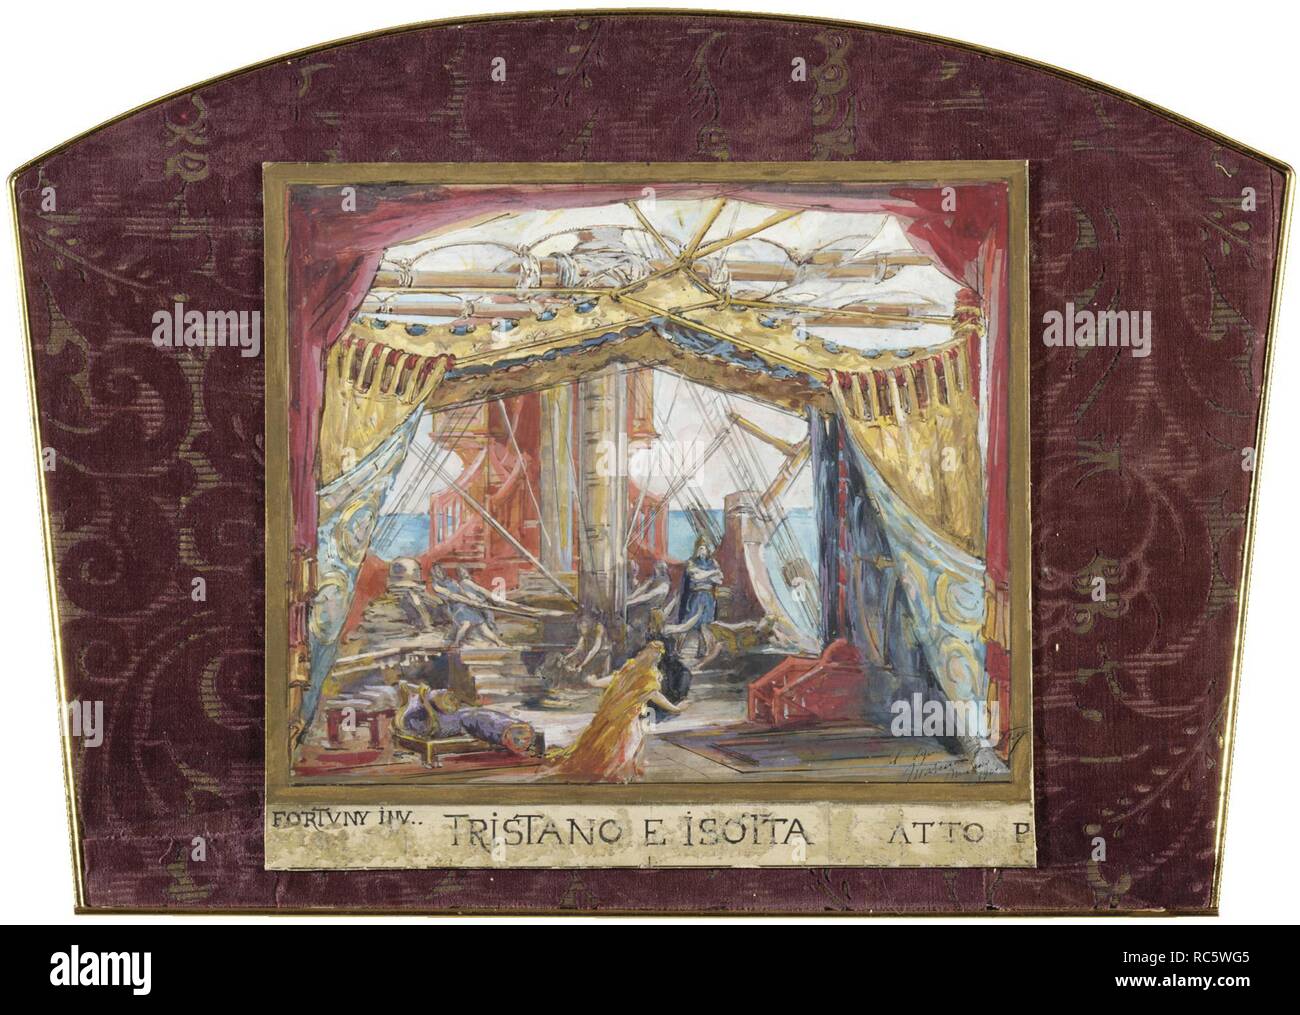 Stage design for the opera Tristan and Isolde by R. Wagner. Museum: PRIVATE COLLECTION. Author: FORTUNY, MARIA. Stock Photo